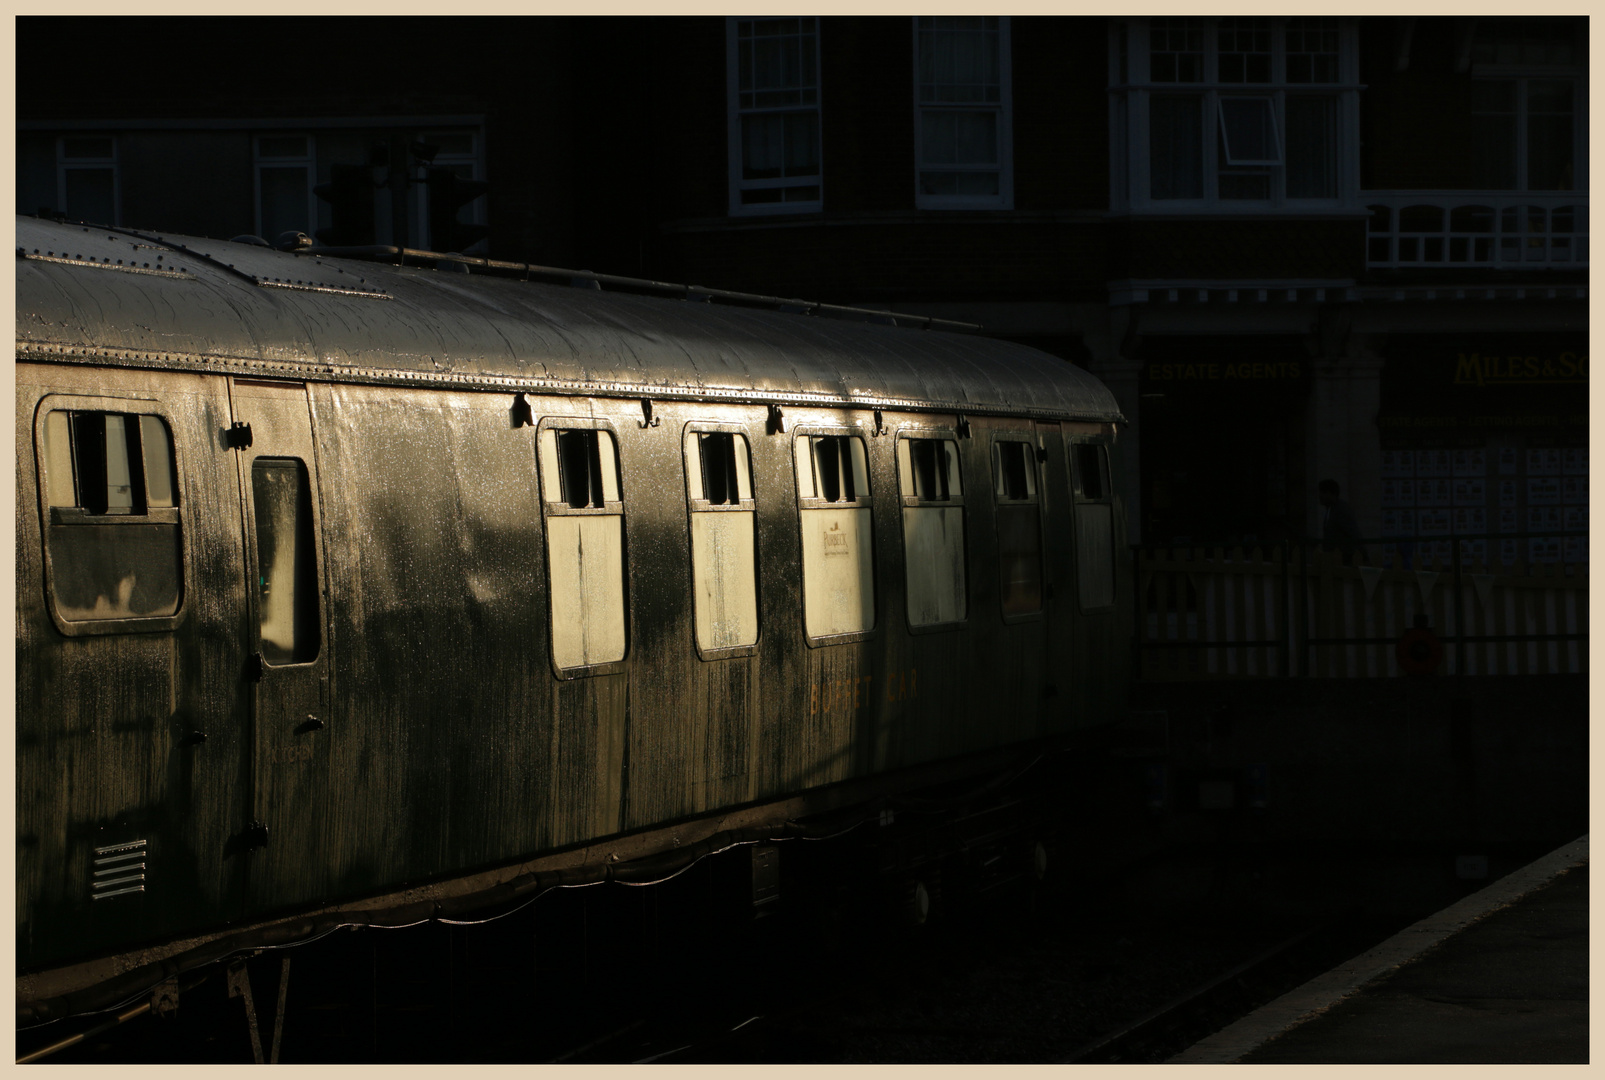 old carriage swanage station